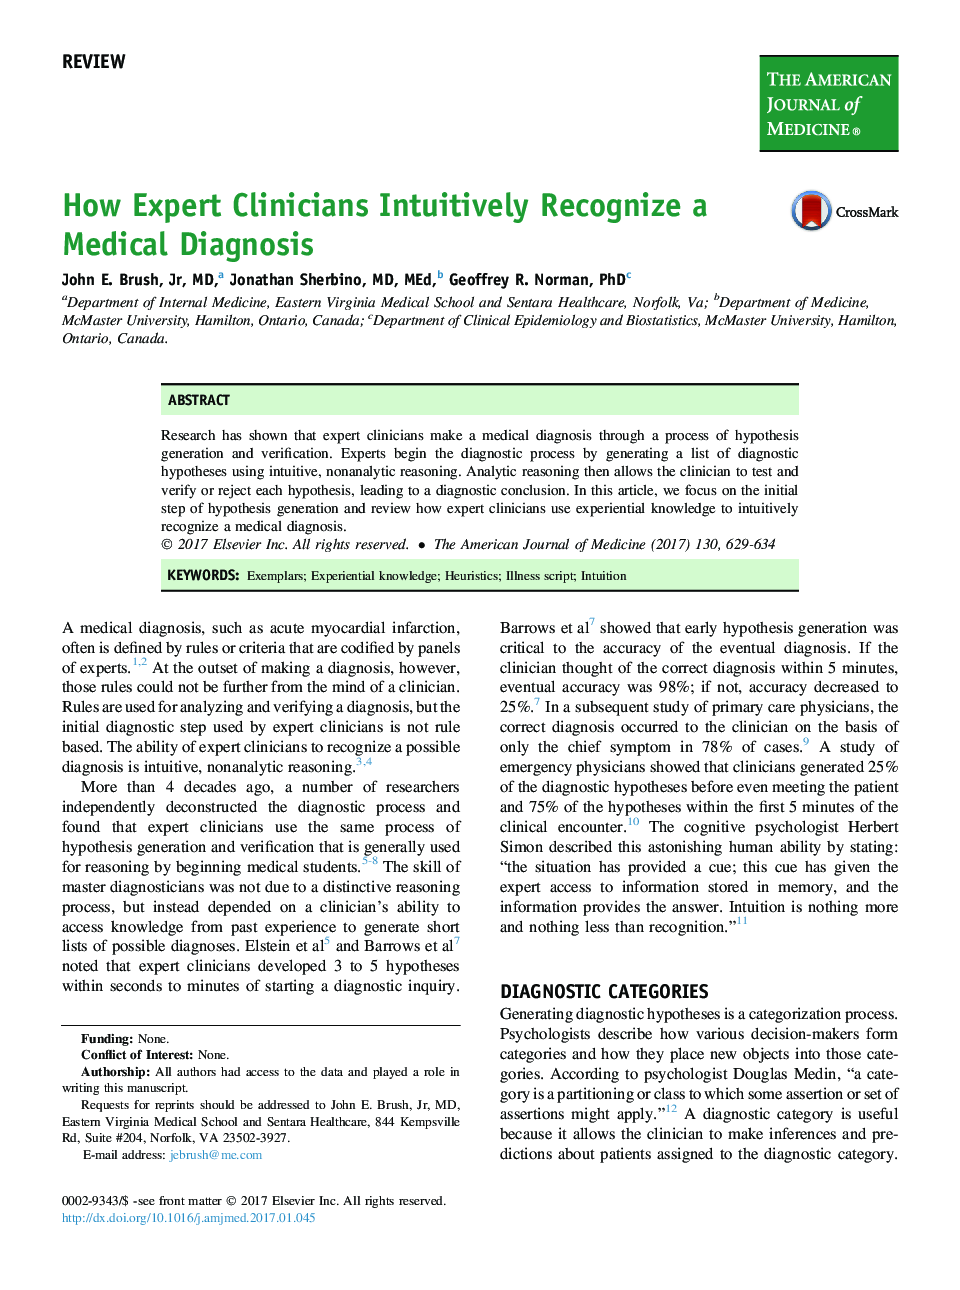 How Expert Clinicians Intuitively Recognize a Medical Diagnosis